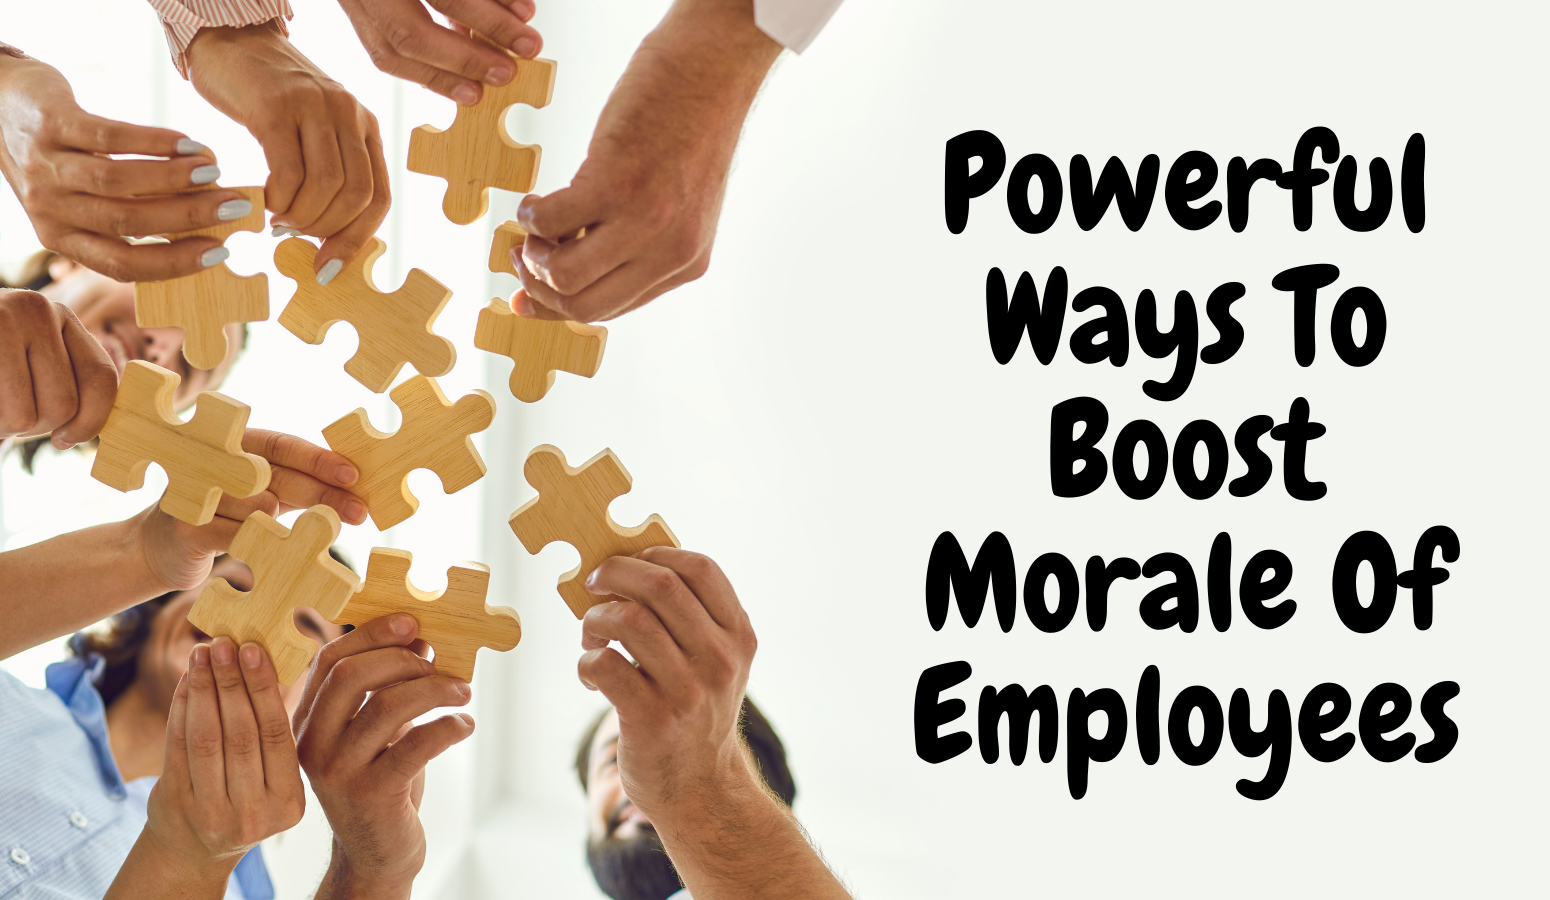 Easy Yet Powerful Ways To Boost Morale Of Employees